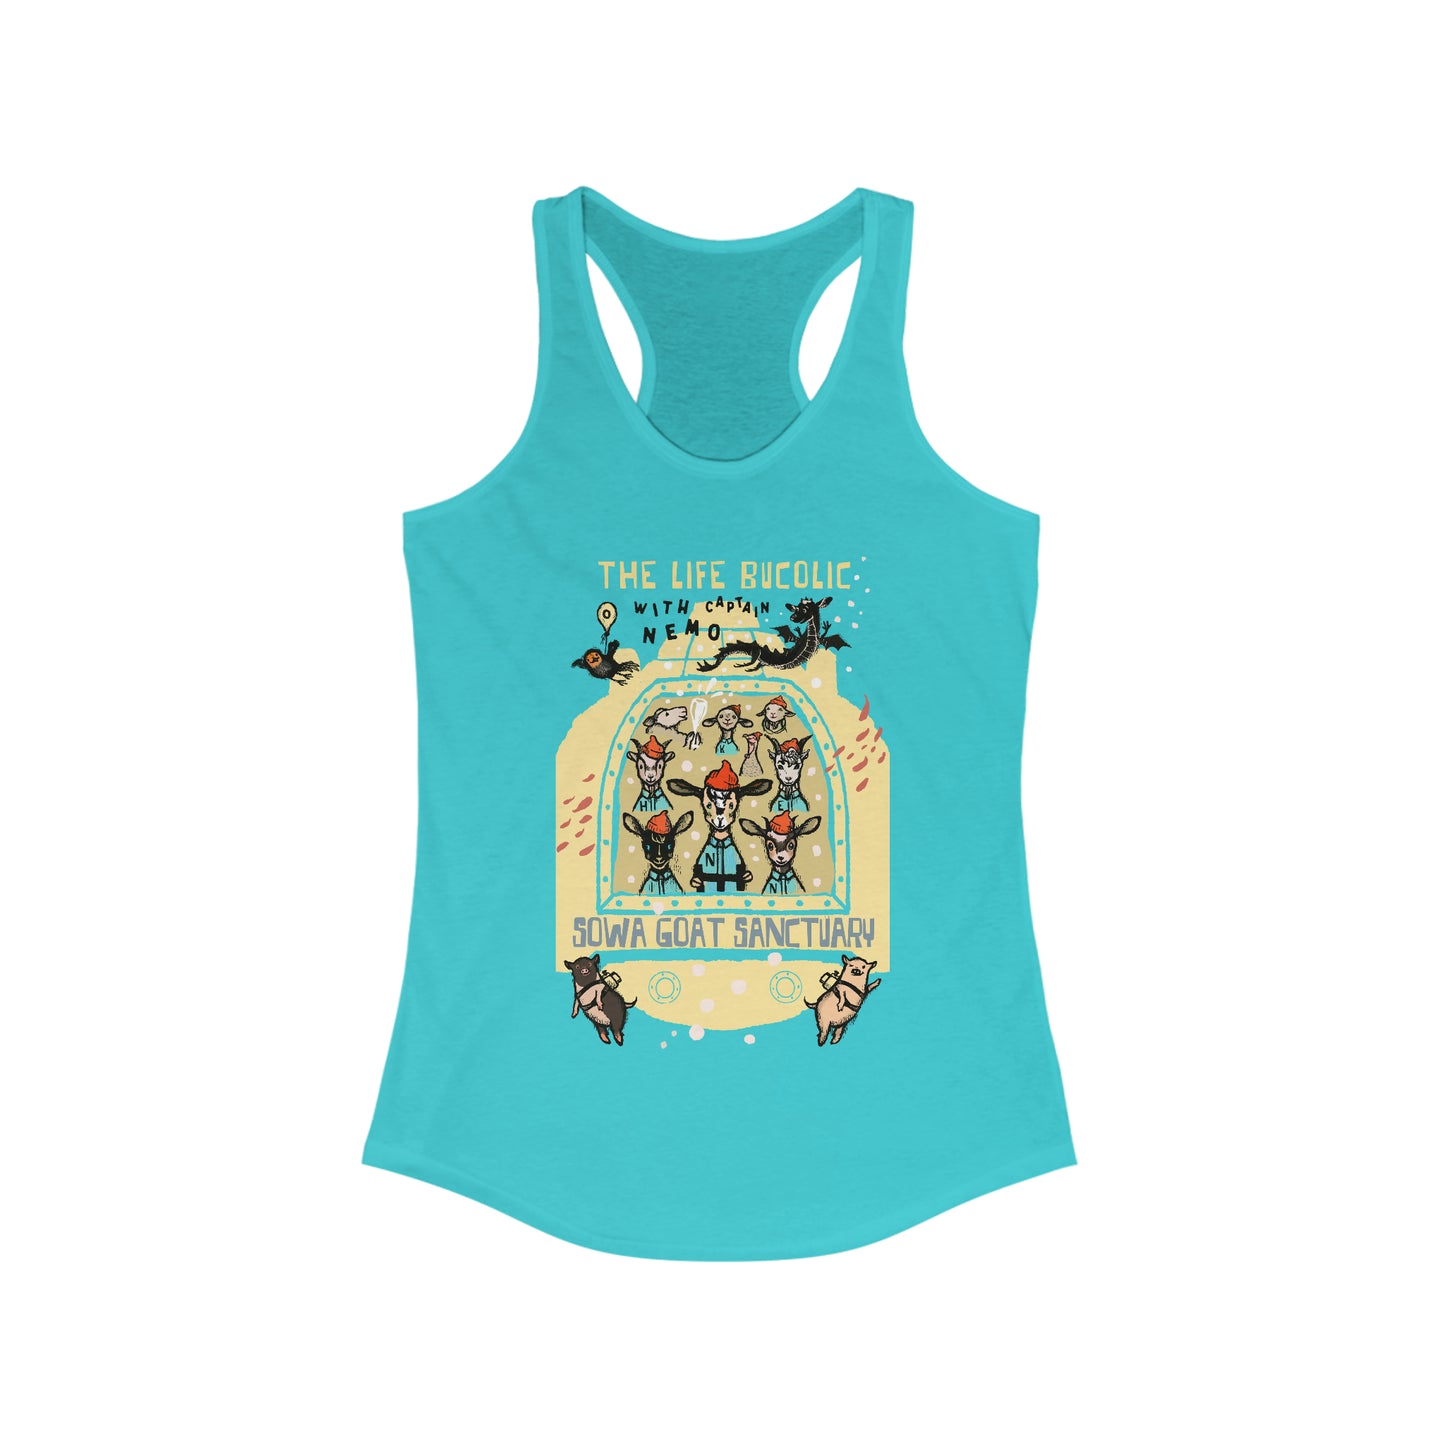 The Life Bucolic with Captain Nemo! - Women's Ideal Racerback Tank